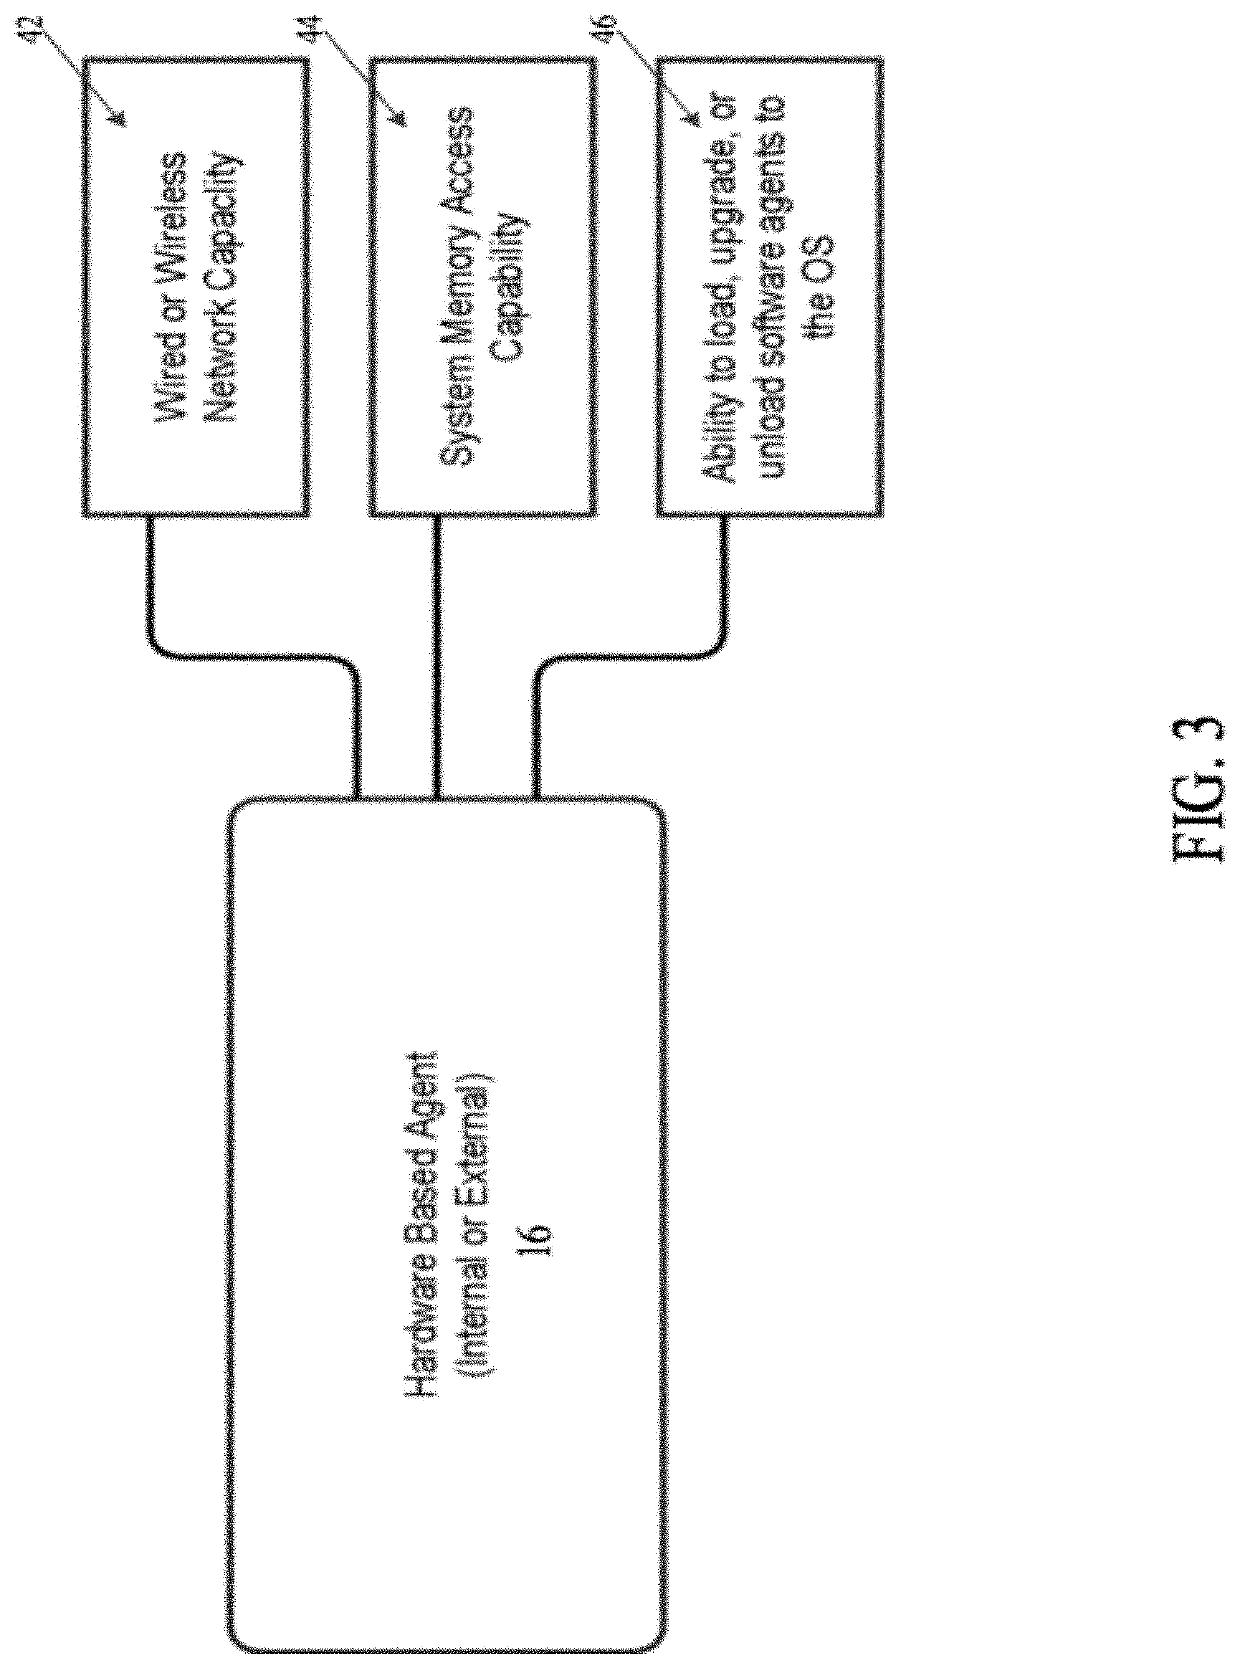 Systems and methods for ransomware detection and mitigation